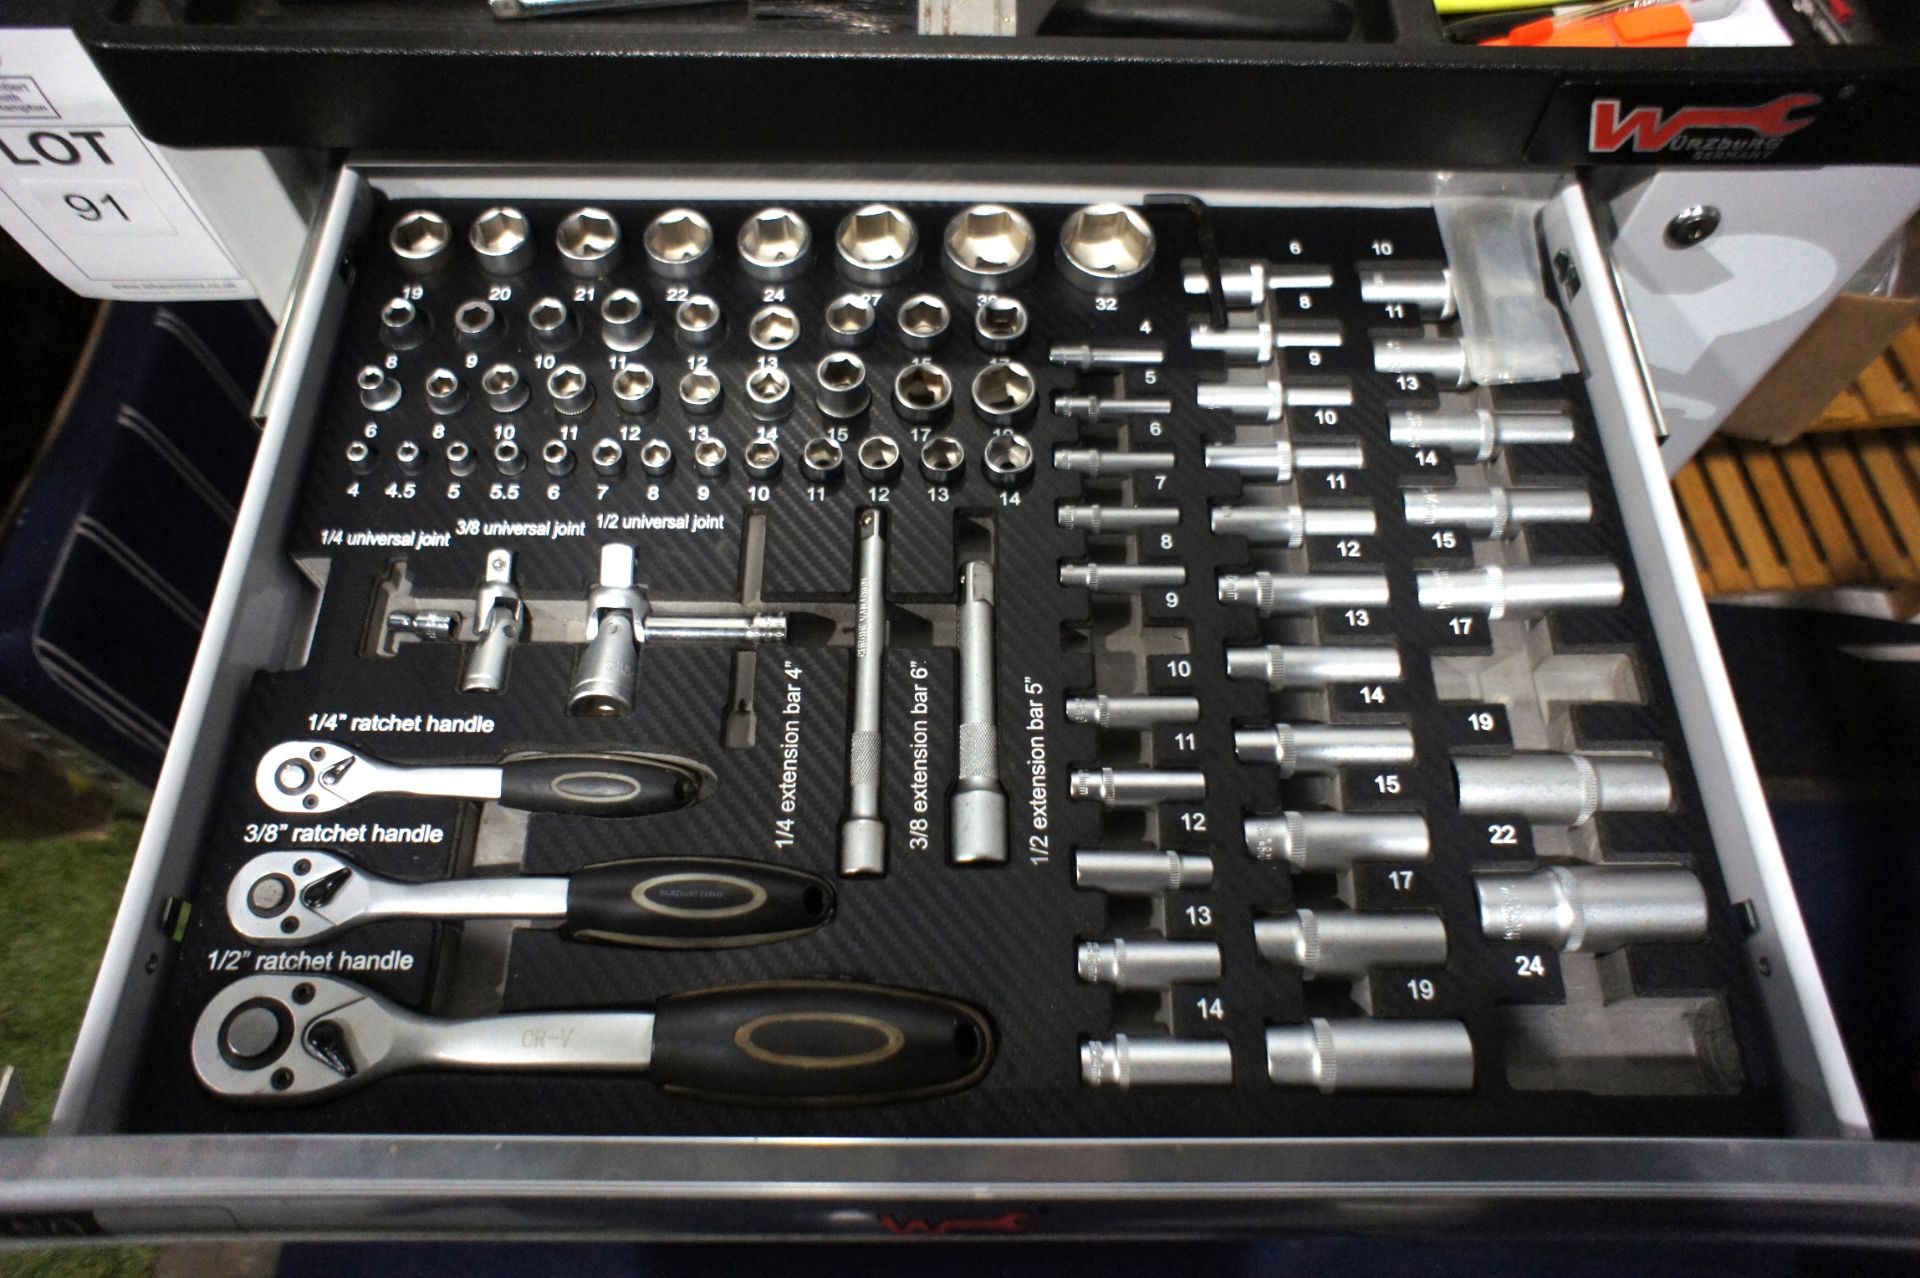 Wurzburg mobile 7-drawer tool kit with various tools - Image 2 of 11